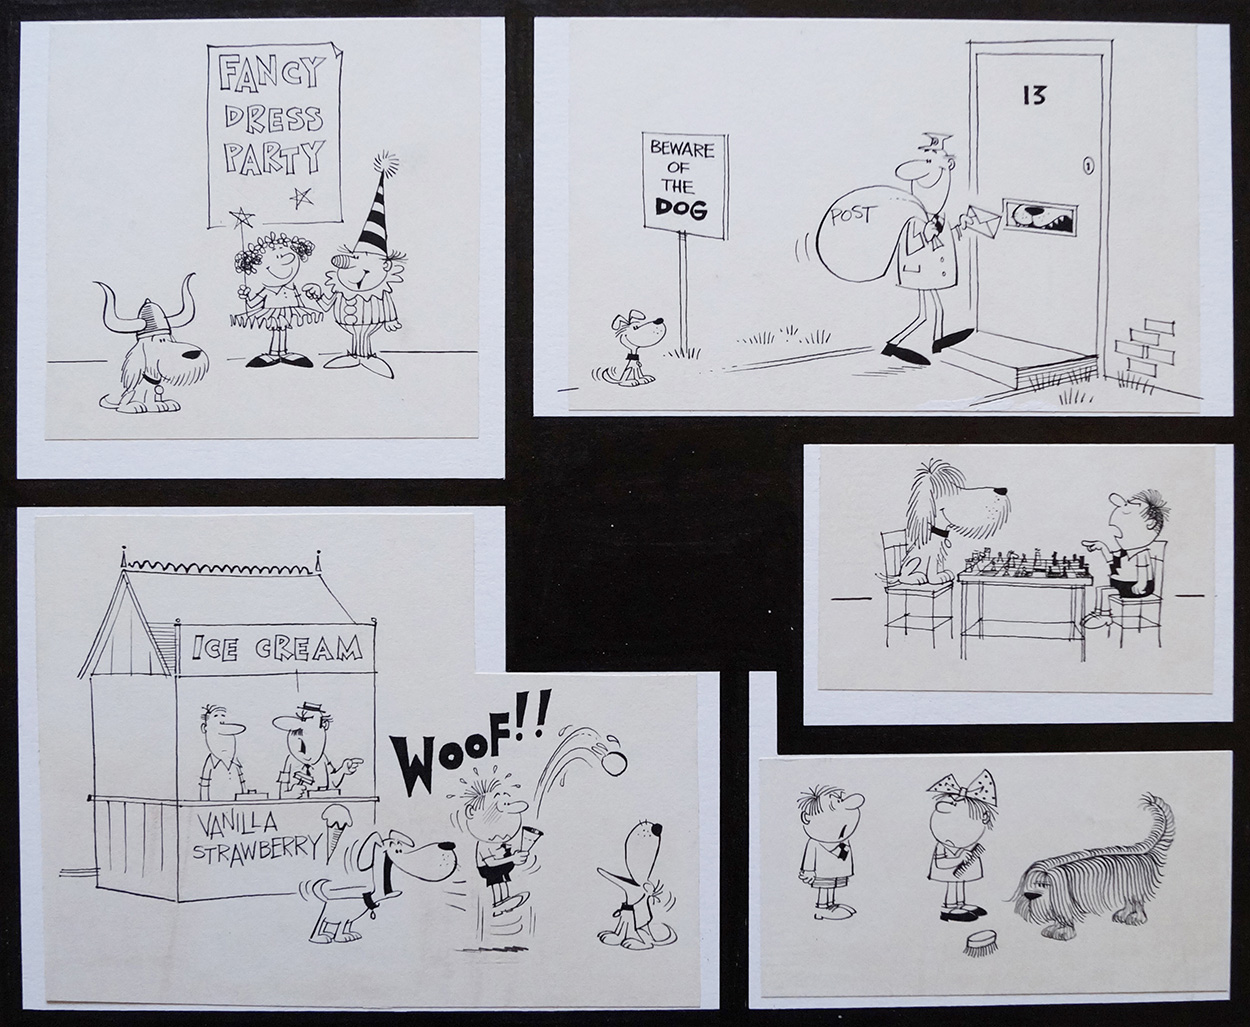 Fun with Fiddy: Doggy Buffoonery! (Original) art by Roland Fiddy at The Illustration Art Gallery